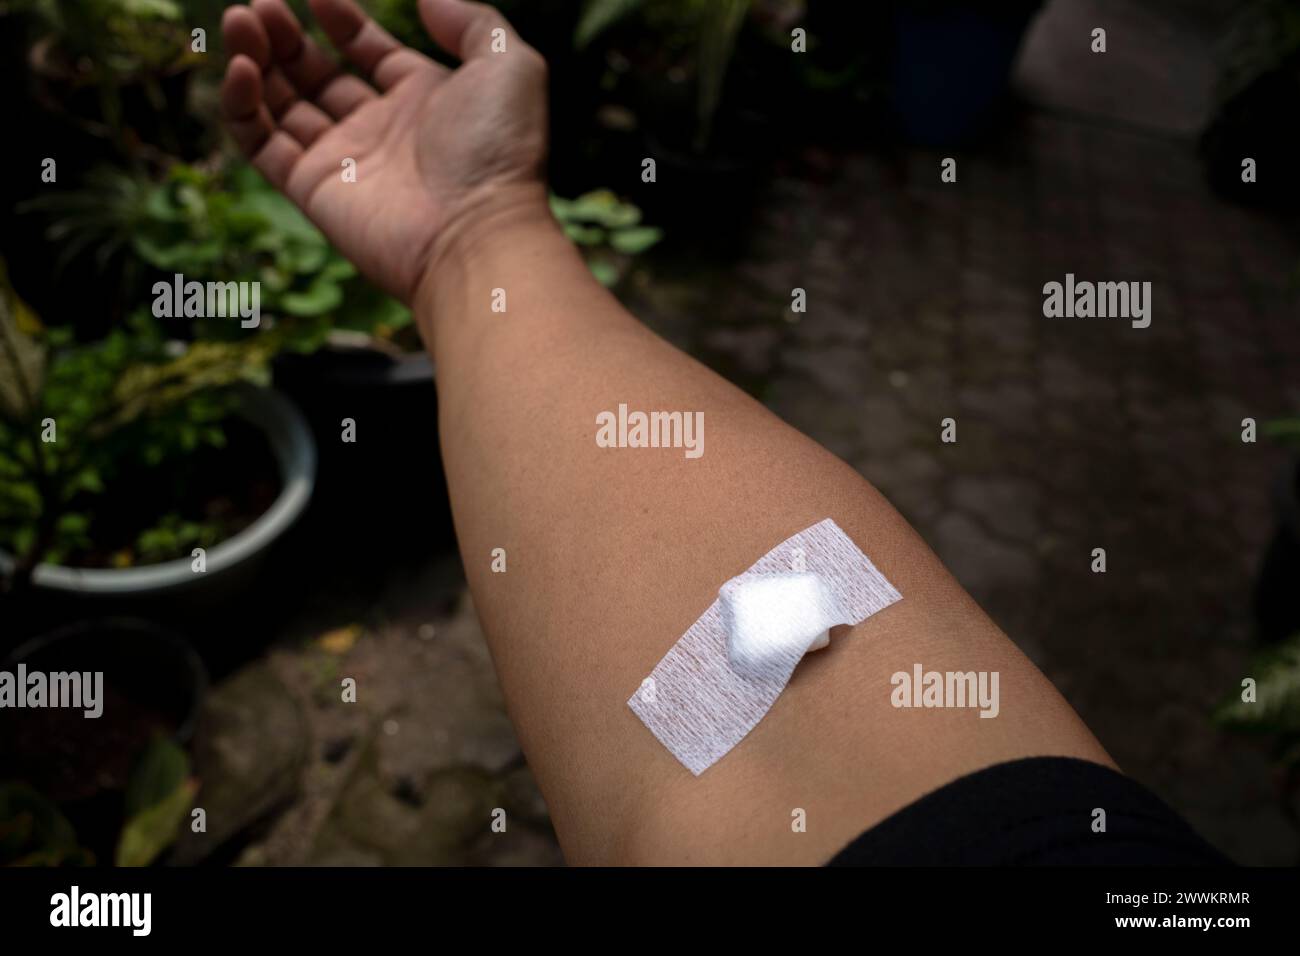 A band aid on right arm after taking blood sample from vein for analysis in medical laboratory. Blood analysis concept. Stock Photo